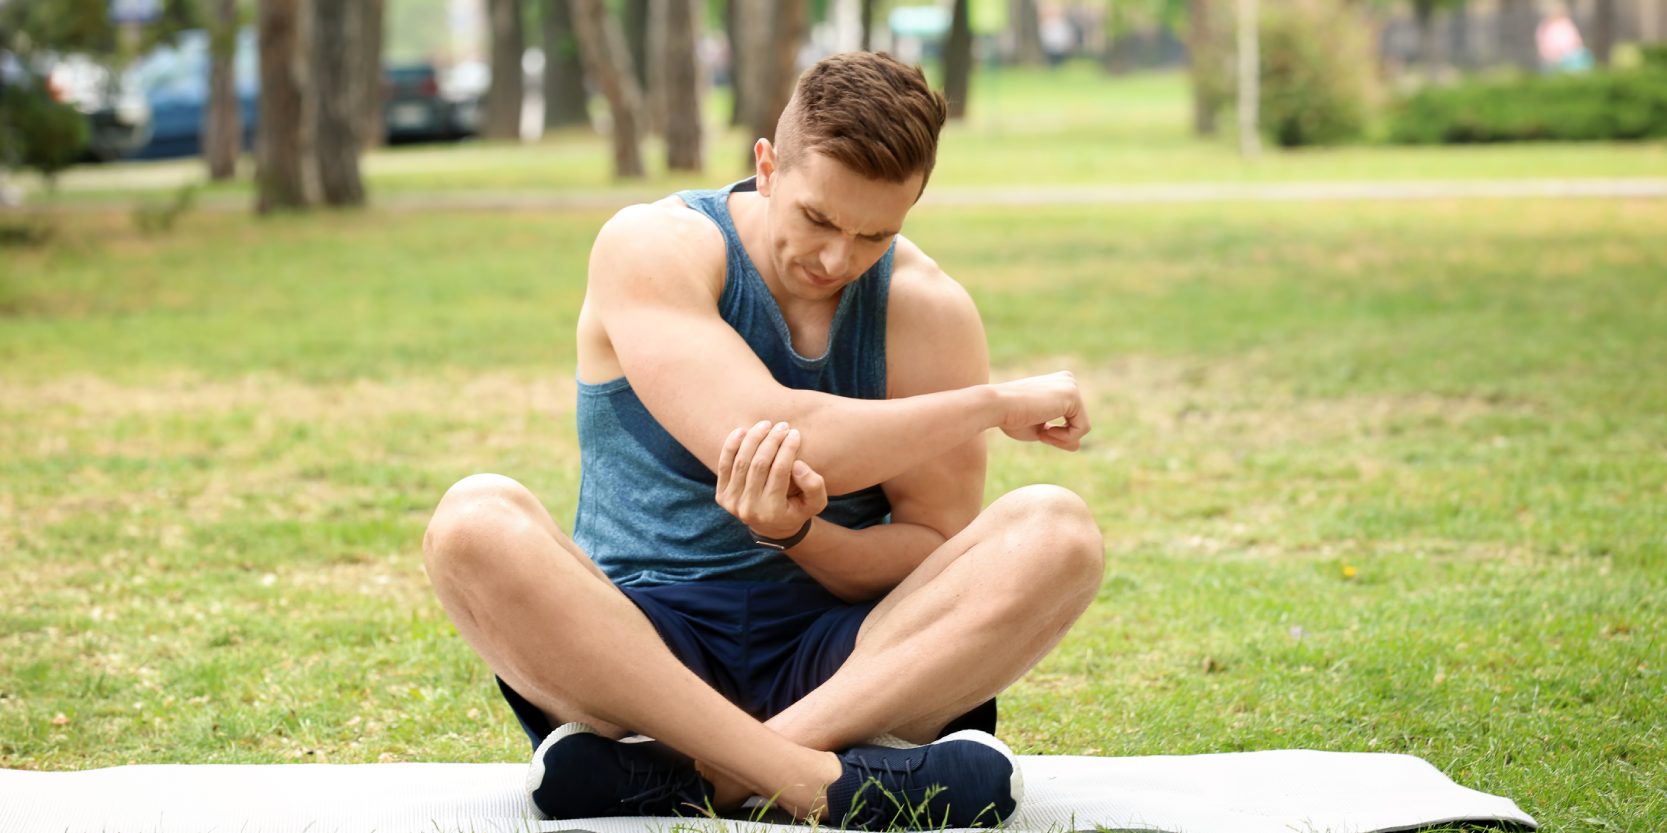 Male athlete suffering from elbow pain during training outdoors